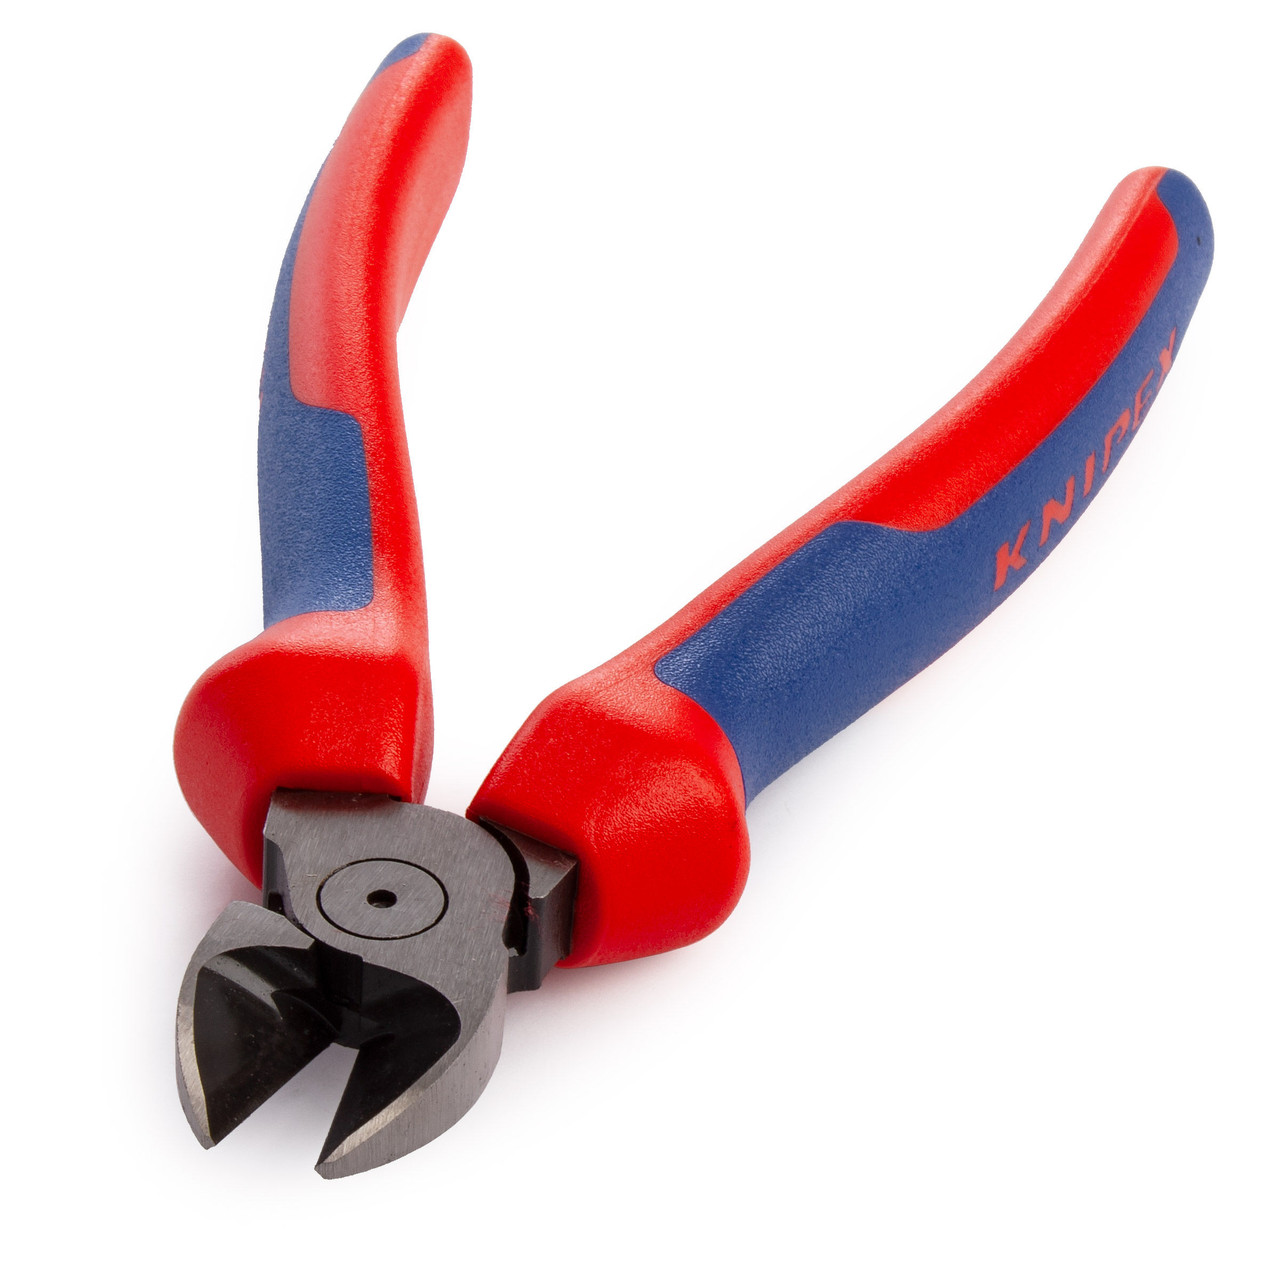 Photos - Pliers / Wire Cutters KNIPEX 7002160SB Diagonal Cutter 160mm 